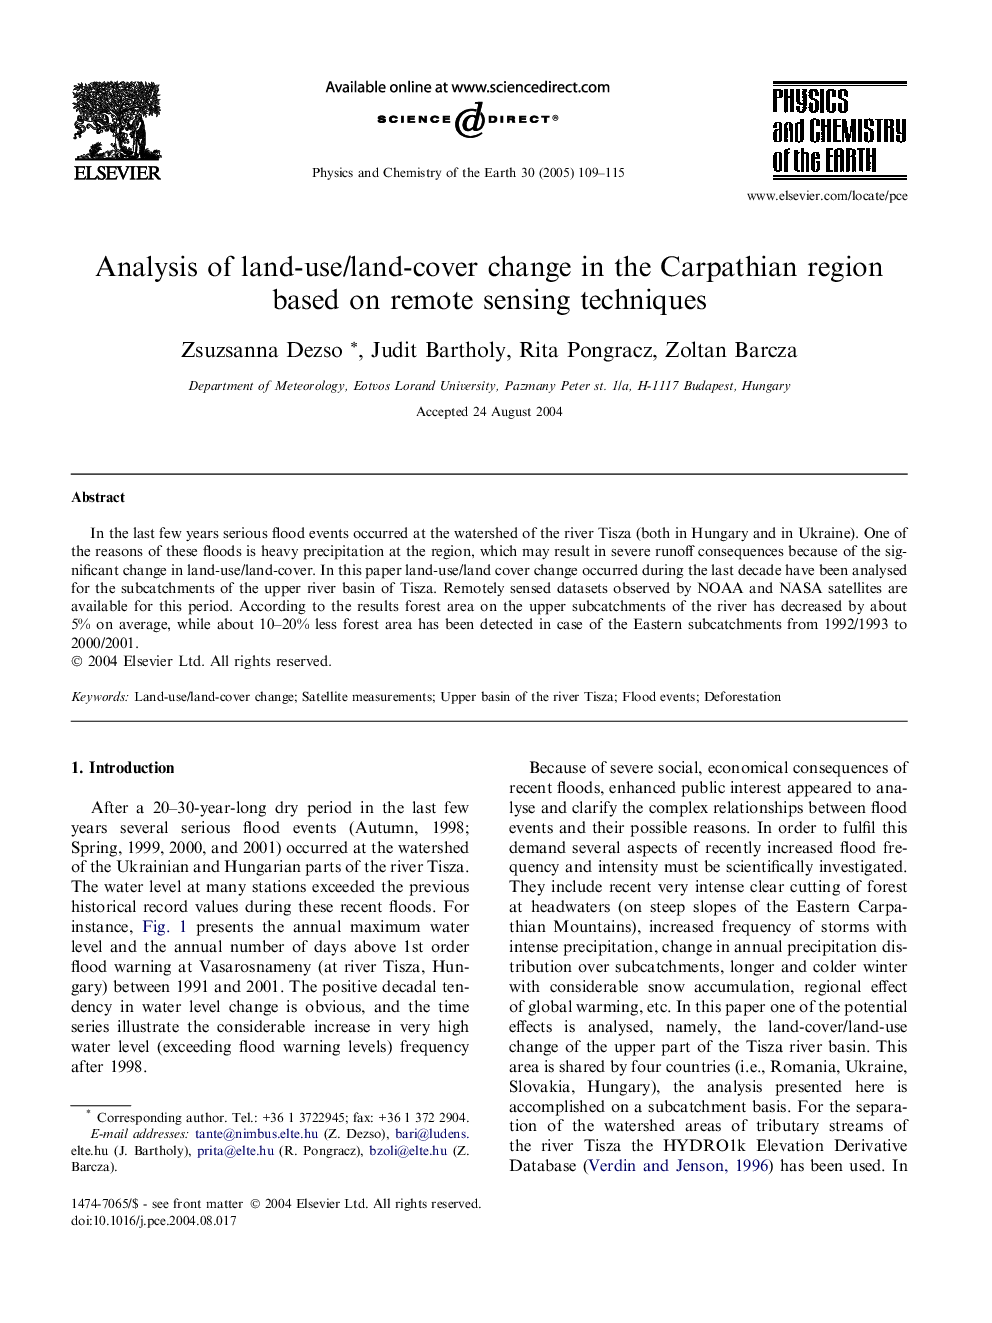 Analysis of land-use/land-cover change in the Carpathian region based on remote sensing techniques